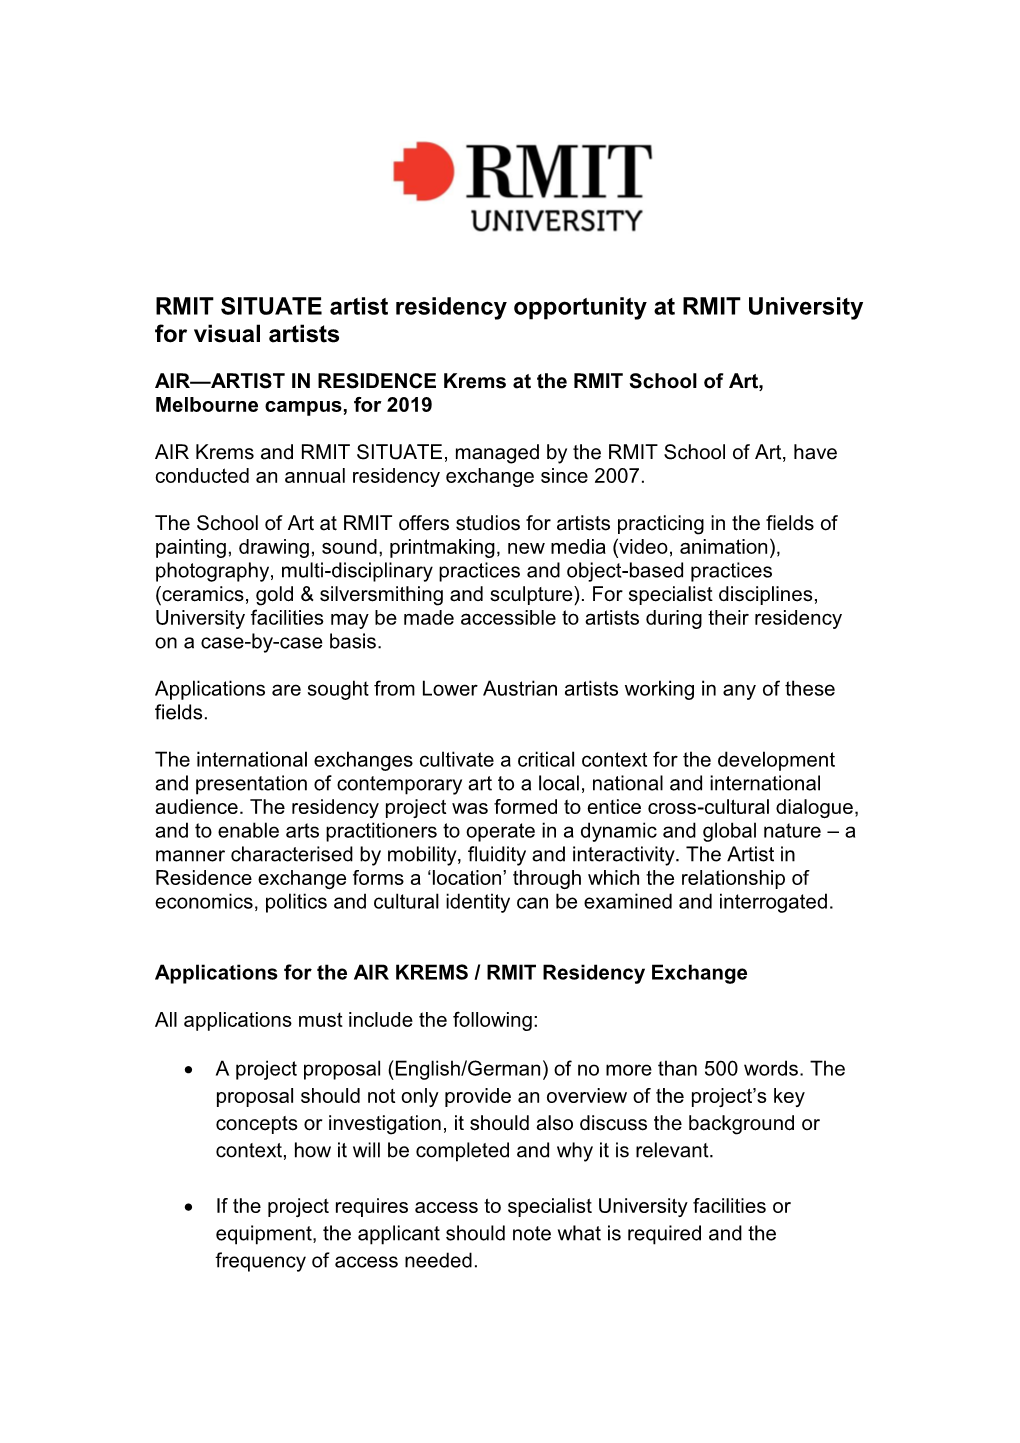 RMIT SITUATE Artist Residency Opportunity at RMIT University for Visual Artists